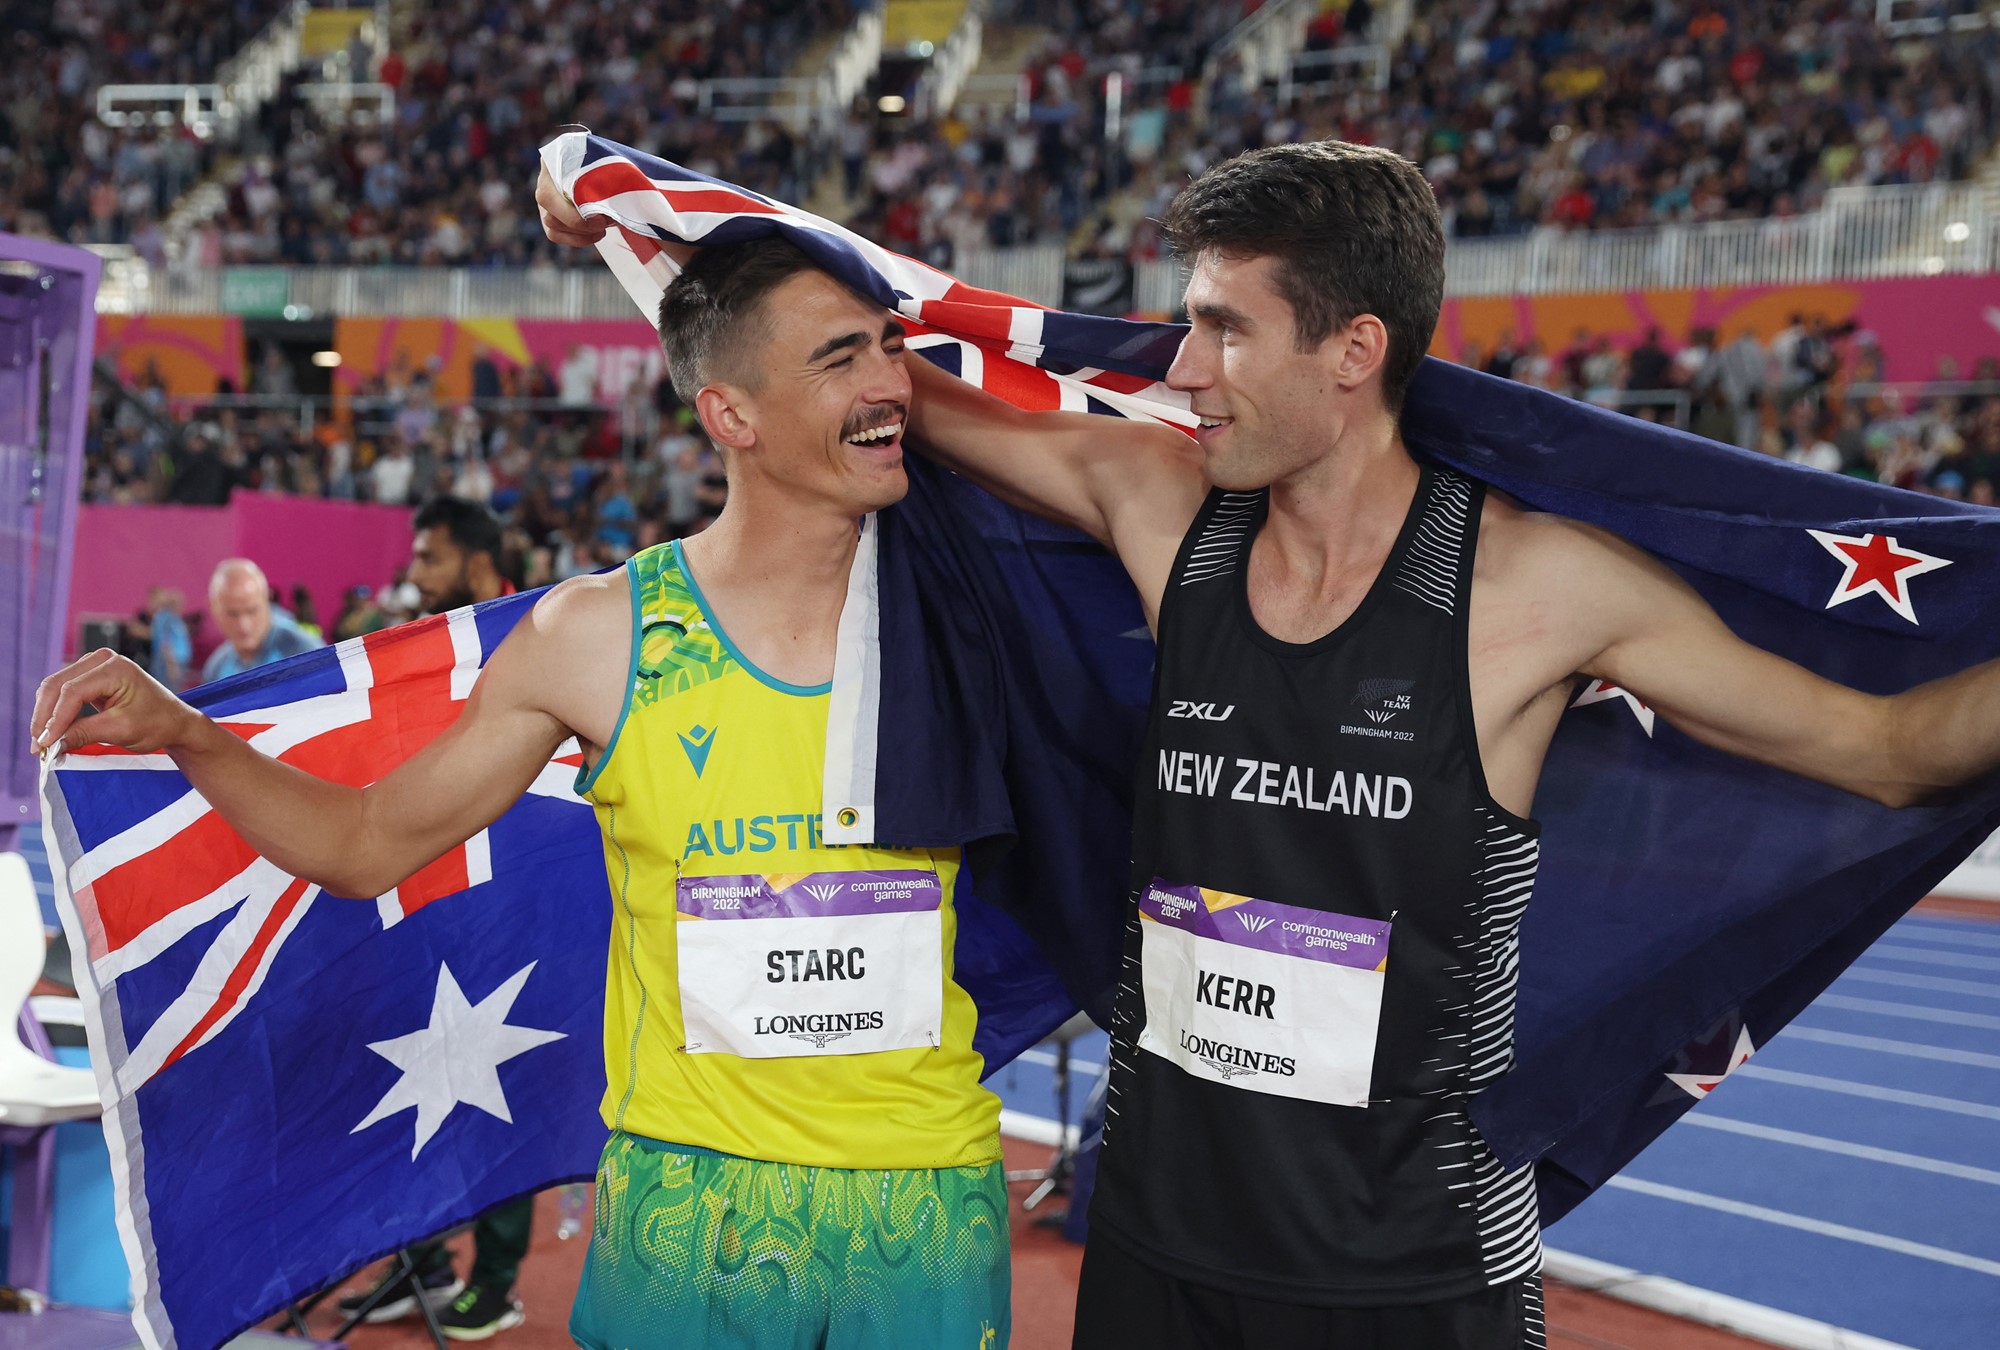 high jumpers brandon starc and hamish kerr smile at each other draped in flags